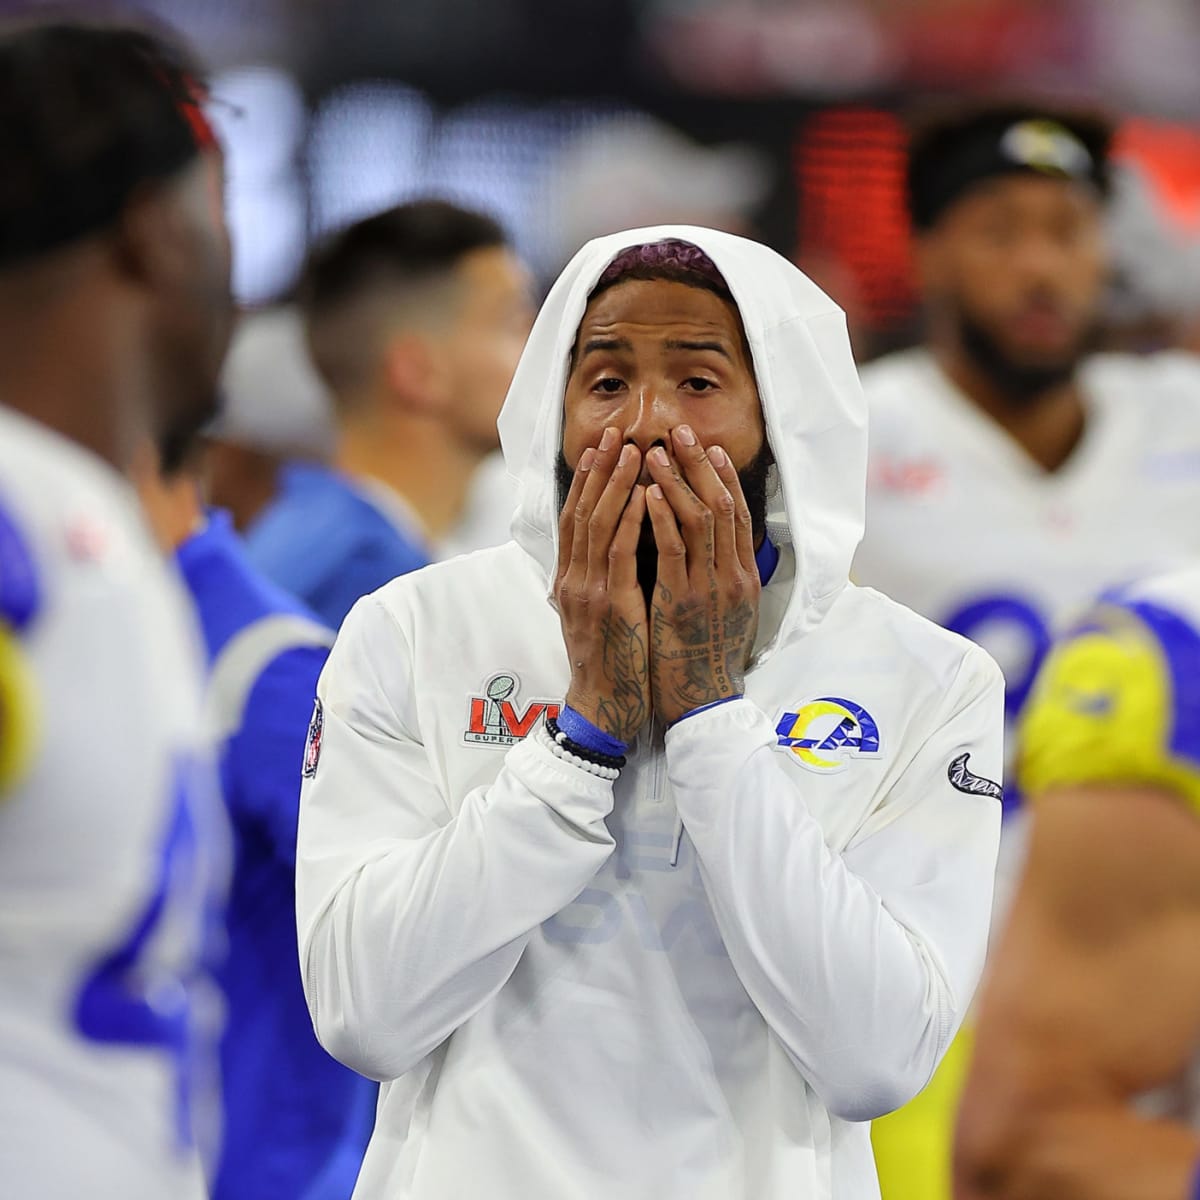 Rams Player Taking Odell Beckham's Number: NFL World Reacts - The